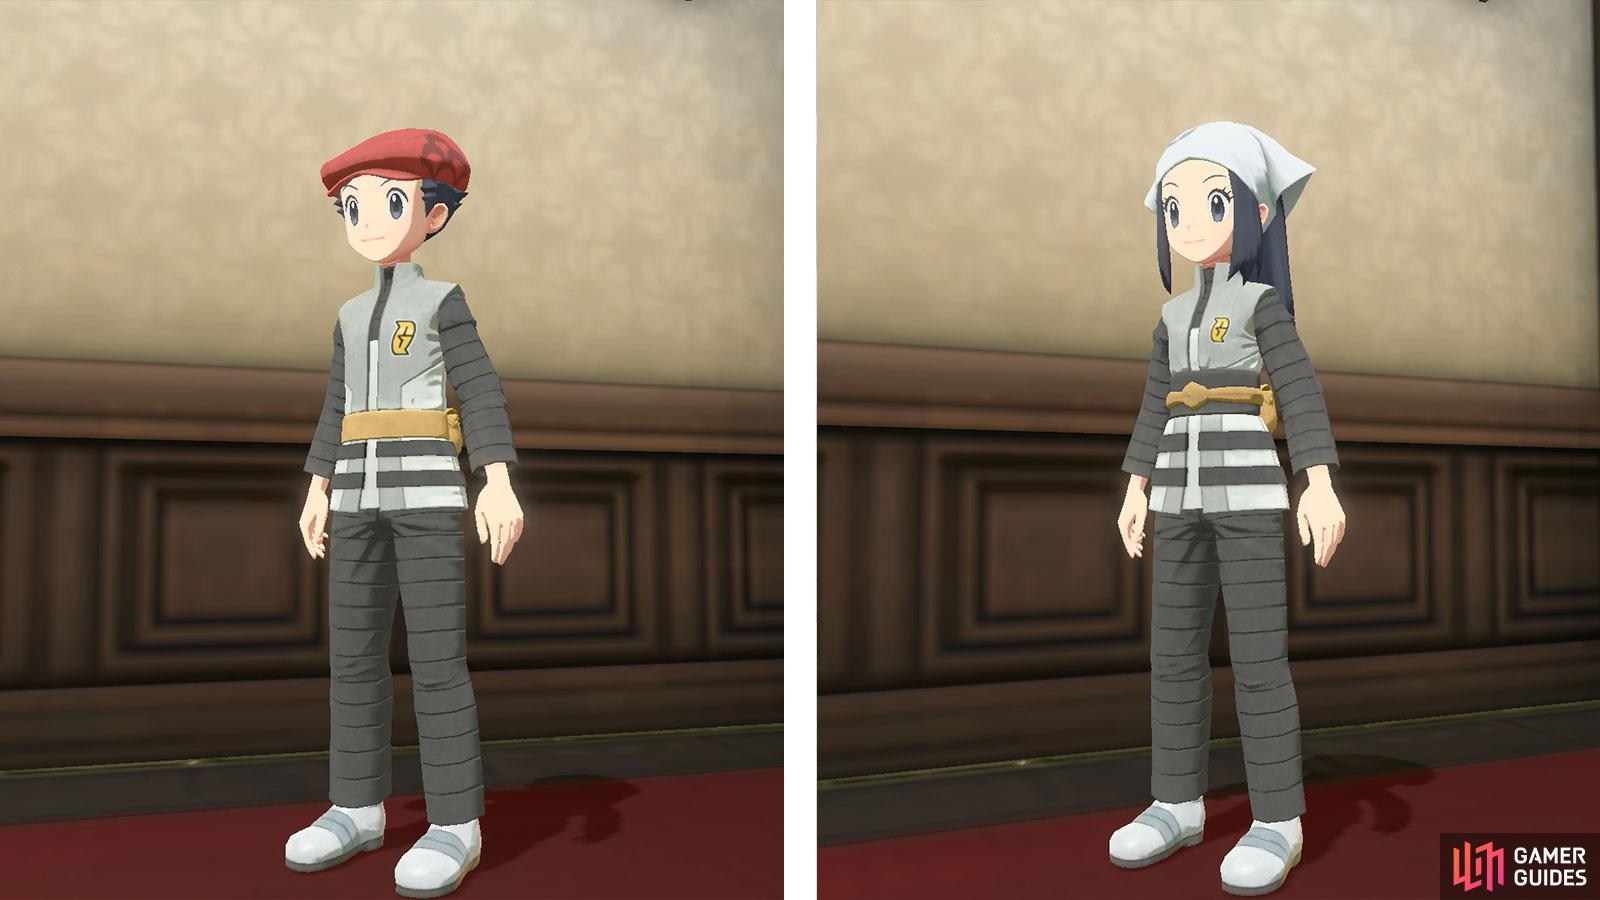 Modern Team Galactic Outfit (Credit: The Pokémon Company).